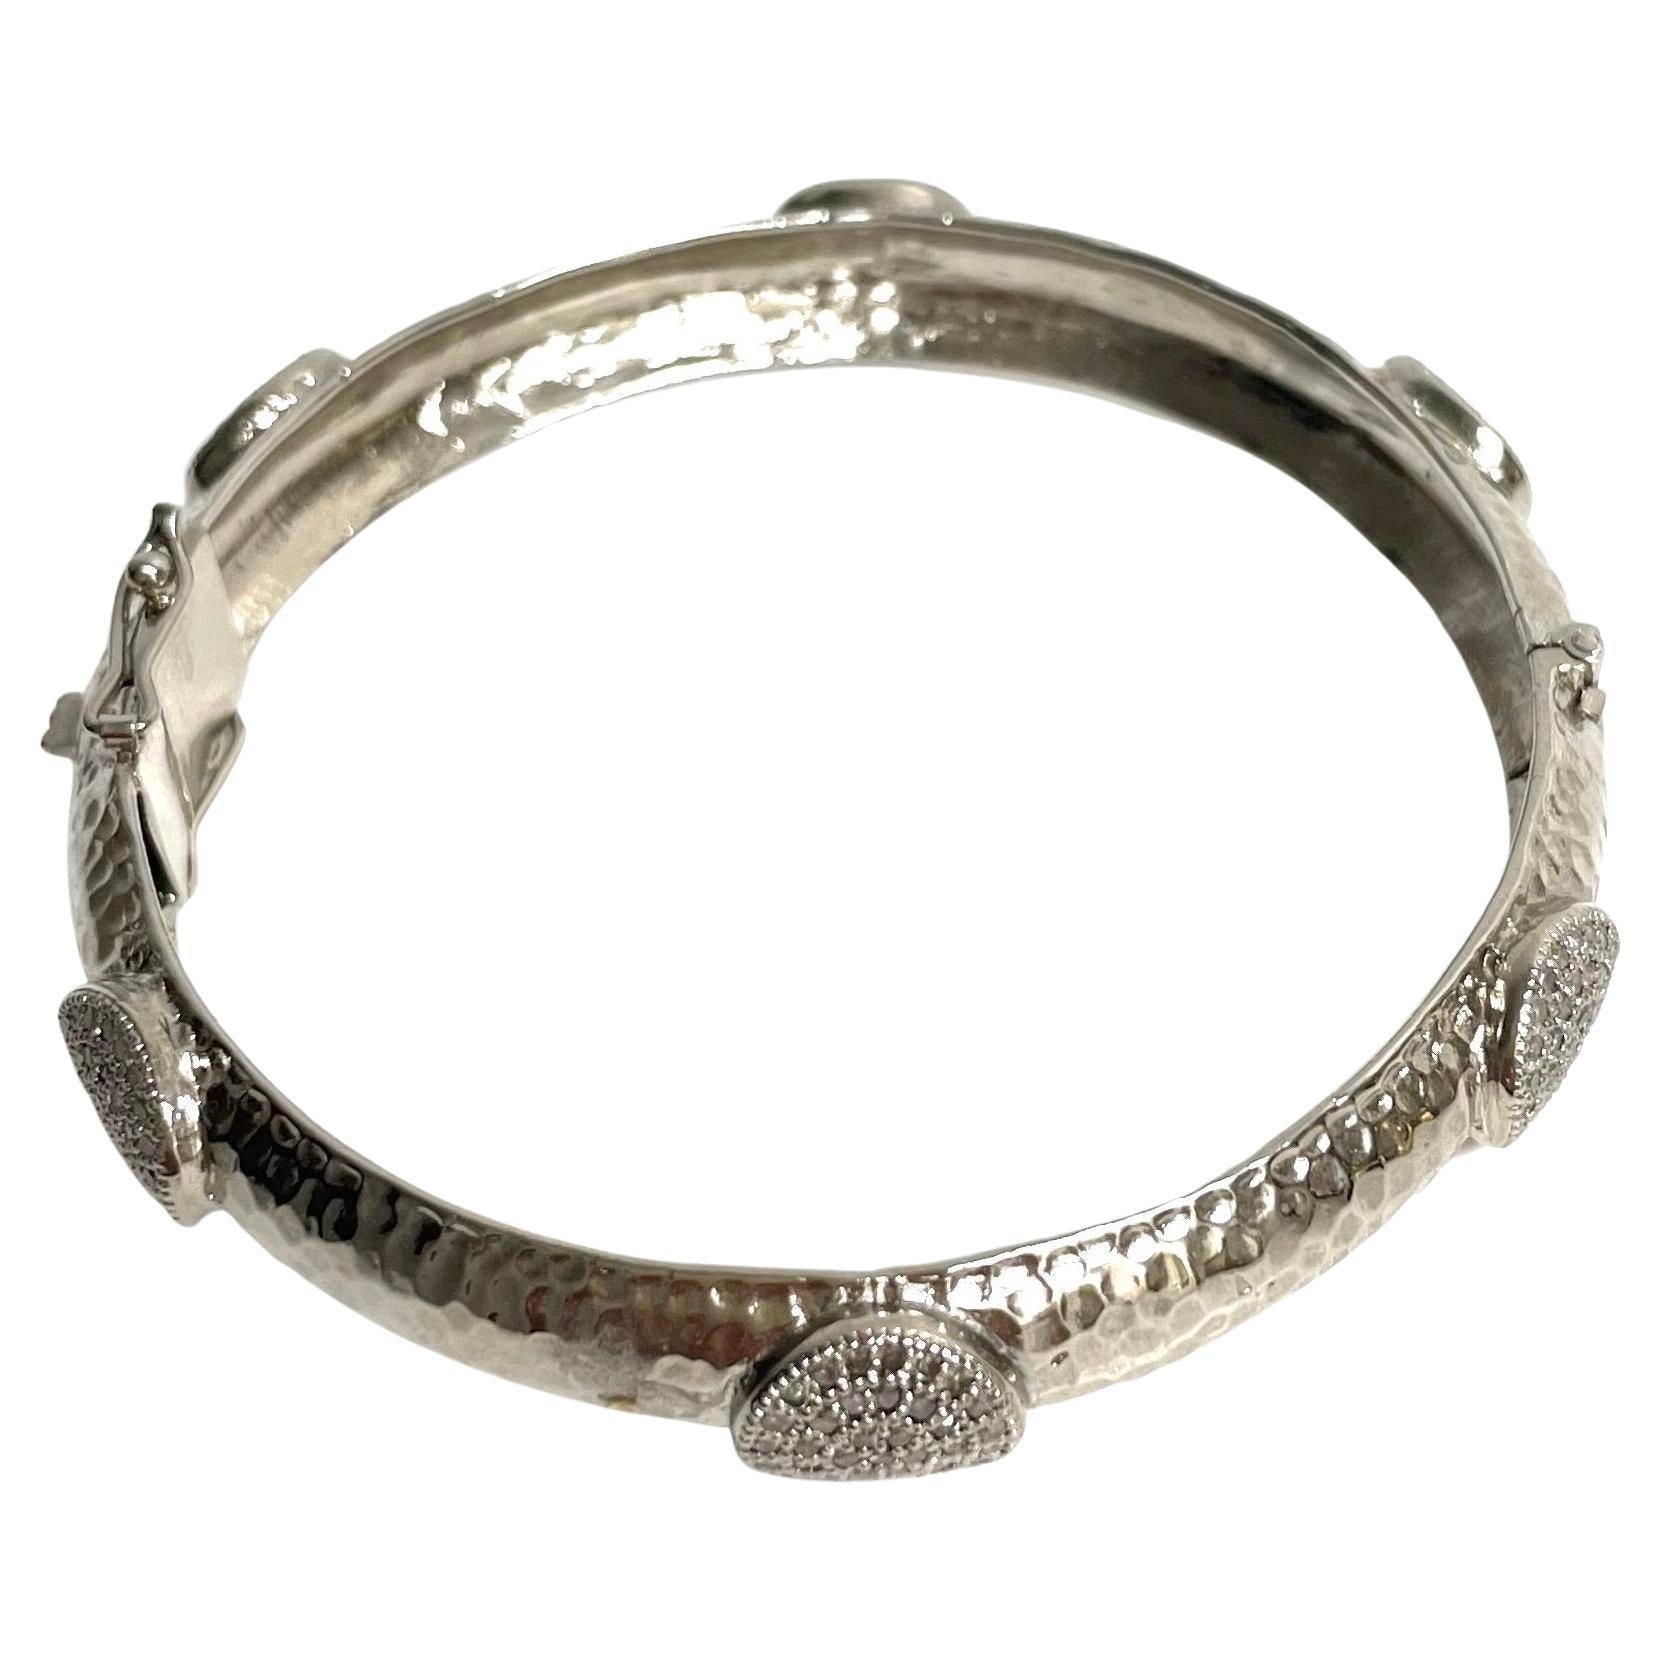  Hammered Rhodium-Plated Silver Bangle with Diamonds Paradizia Bracelet For Sale 6